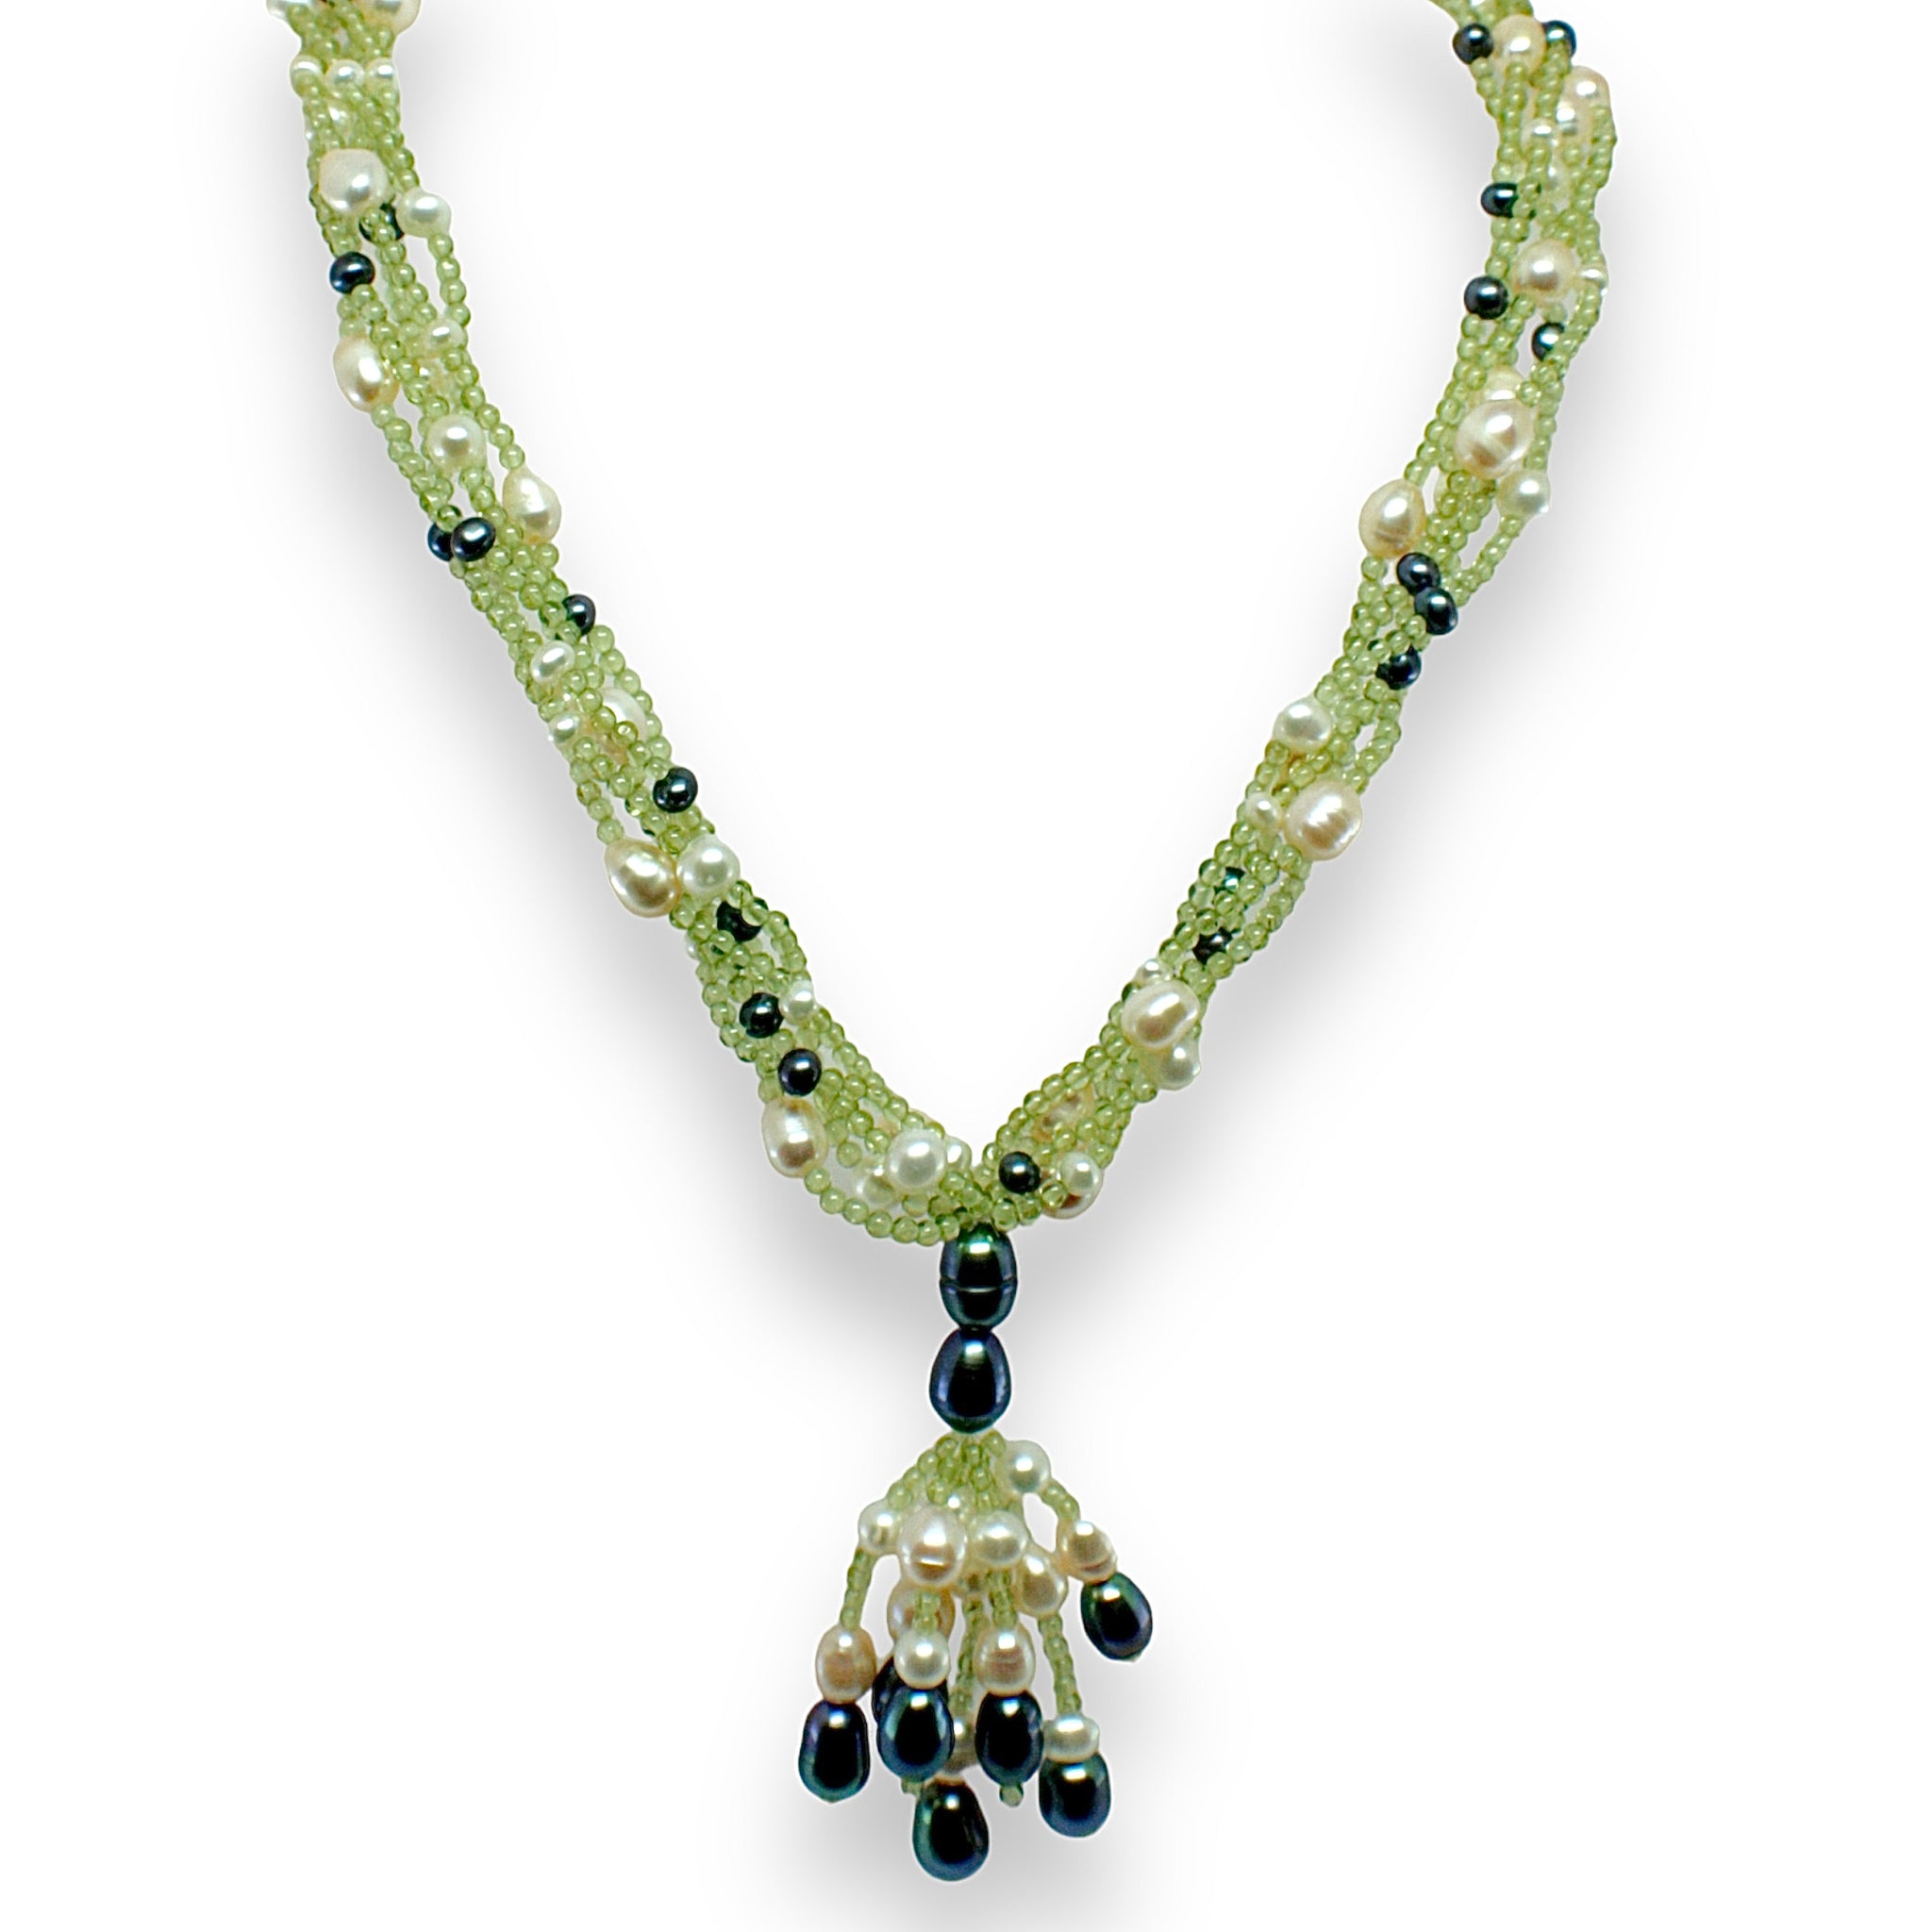 Natural Handmade Necklace 16"-18" Peridot with Pearls Gemstone Beads Jewellery